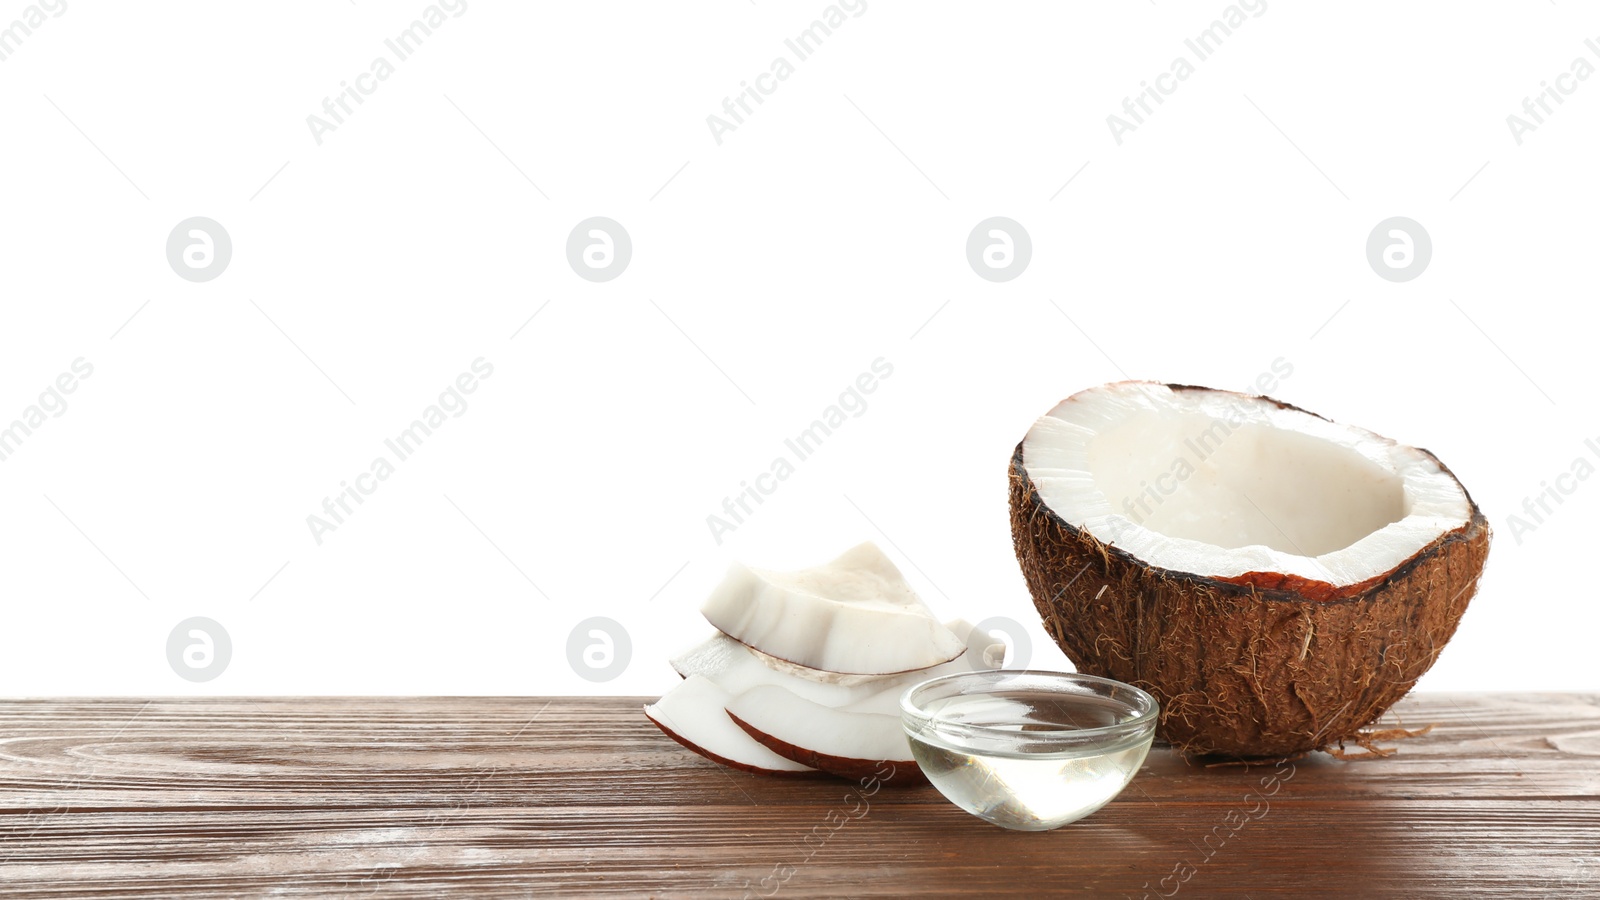 Photo of Ripe coconut and bowl with natural organic oil on wooden table against white background